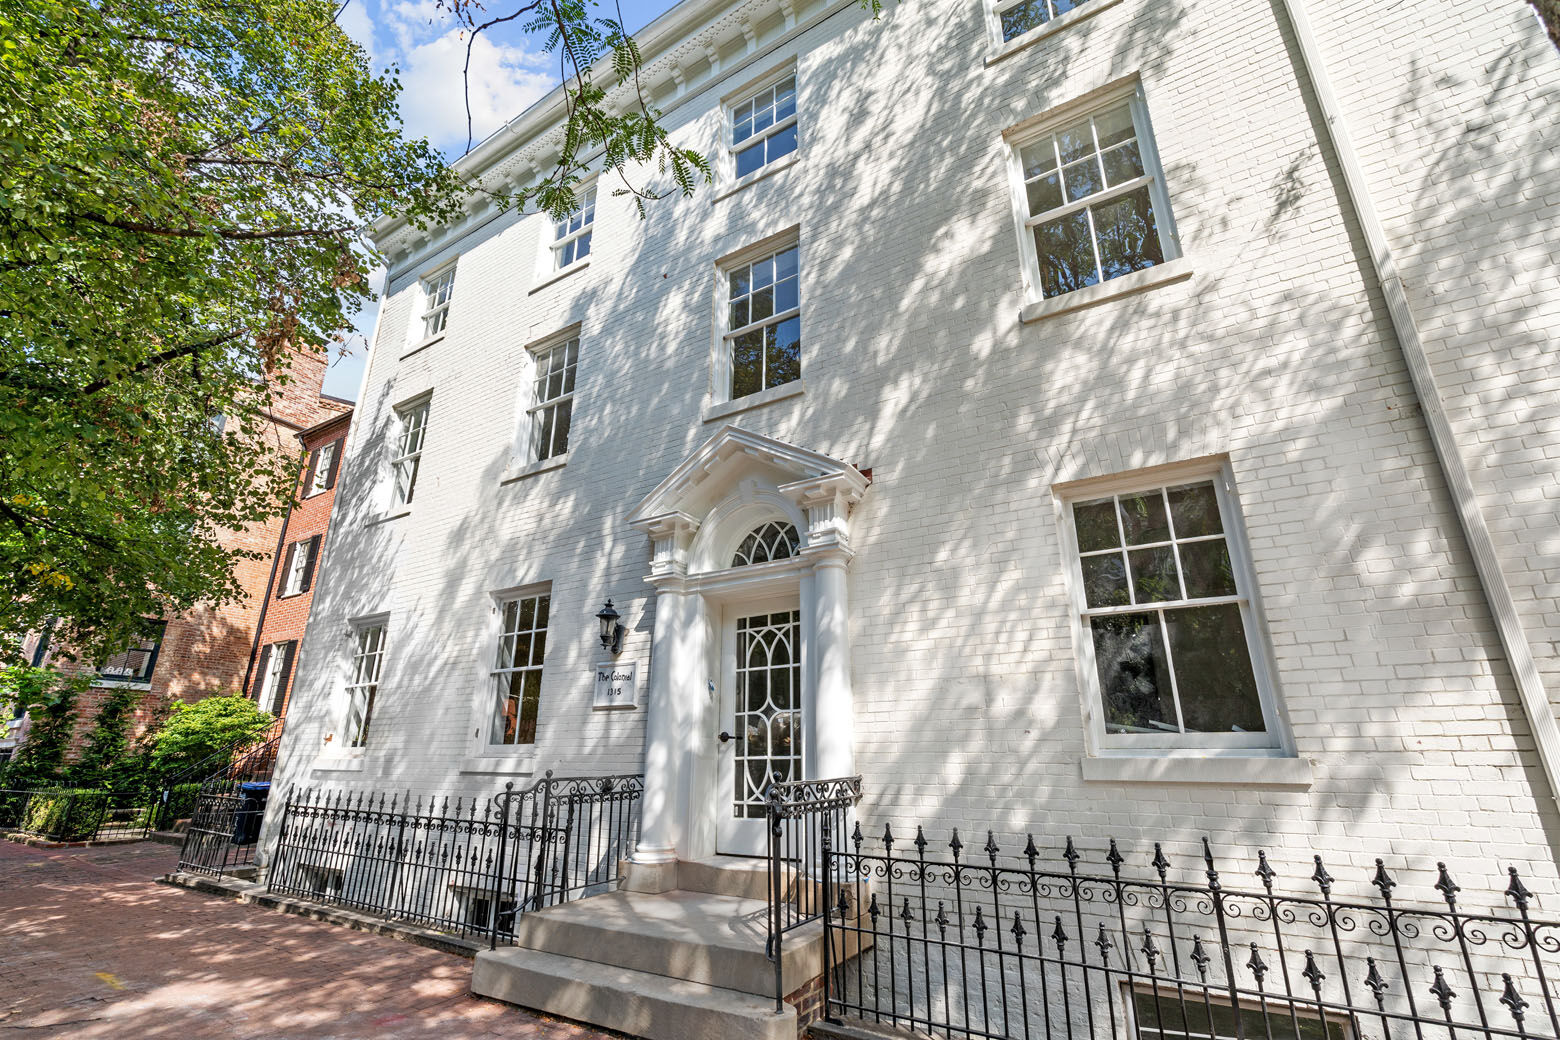 A historic, three story building in Georgetown’s East Village has been converted into 18 luxury condominiums. (Courtesy Townsend Visuals)